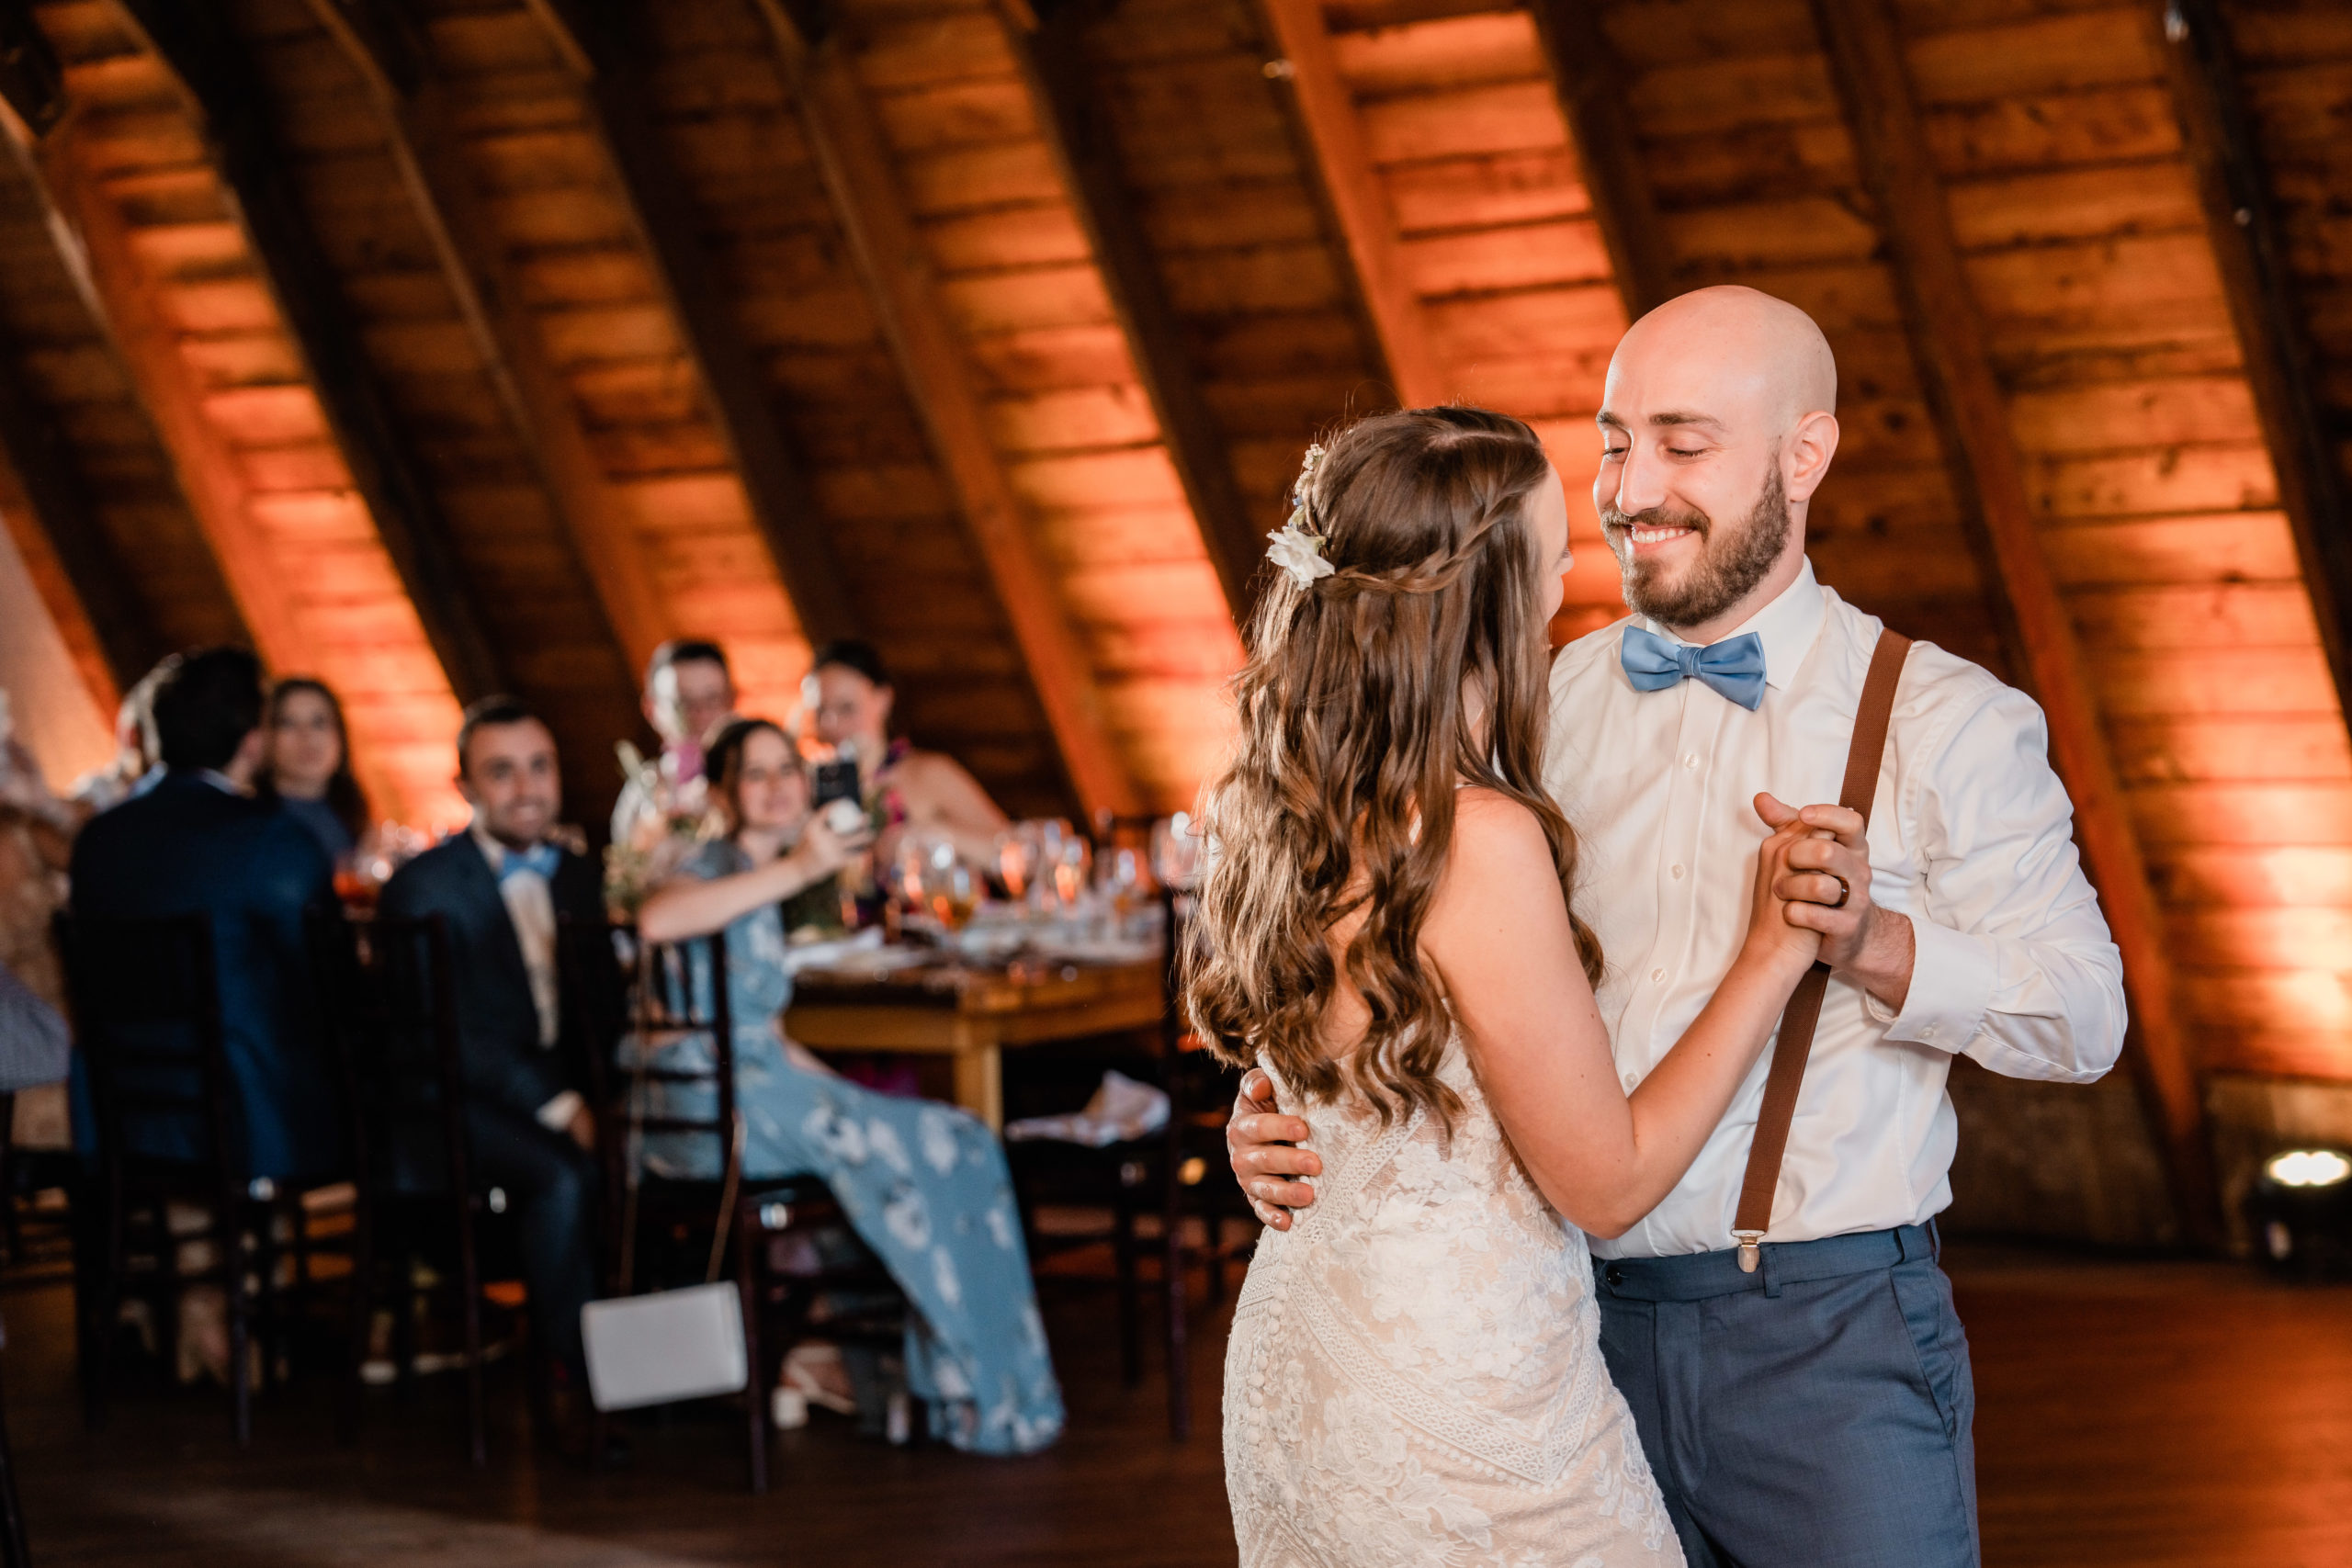 The Barn at Perona Farms, Perona Farms Wedding, New Jersey Wedding Photographer, Sussex County Wedding Photographer, NJ Wedding Photographer, Sussex County NJ Photographer, New Jersey Wedding Venues, Sussex County Wedding Venue, Wedding Inspiration, Wedding Planning, Wedding Ideas, Unique Wedding Photos, Wedding Photo Ideas, Boho Wedding, Farm Wedding, Bride and groom during their first dance at their Perona Farms Barn wedding reception